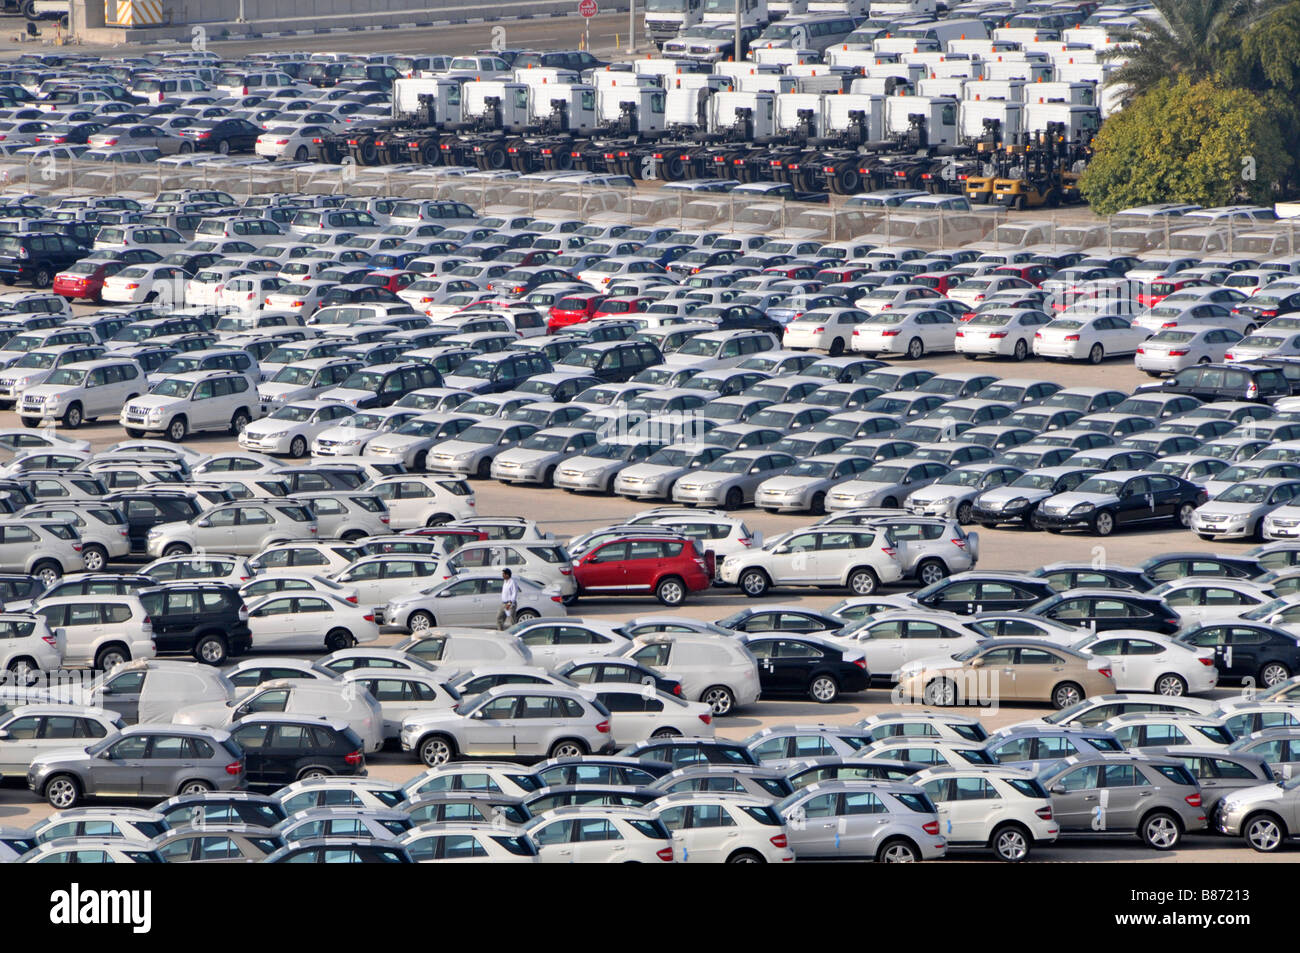 Aerial view of dockside commercial port storage rows of imported new cars & lorry truck awaiting distribution Abu Dhab United Arab Emirates UAE Asia Stock Photo